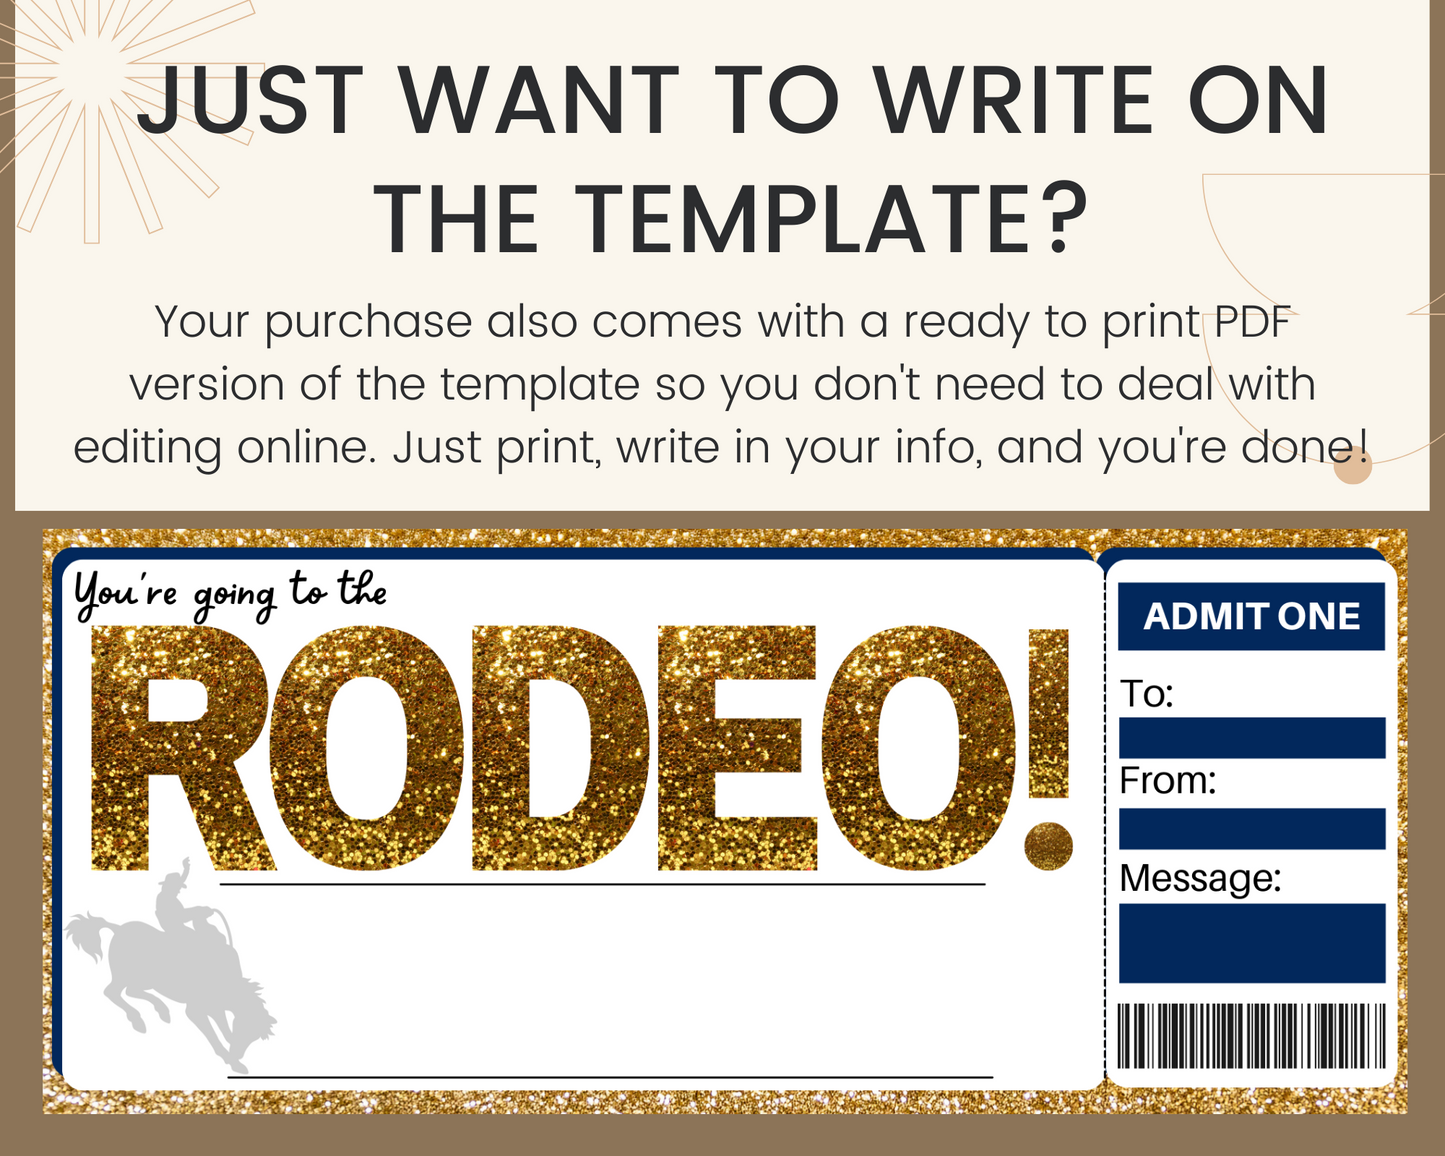 Rodeo Gift Ticket Template